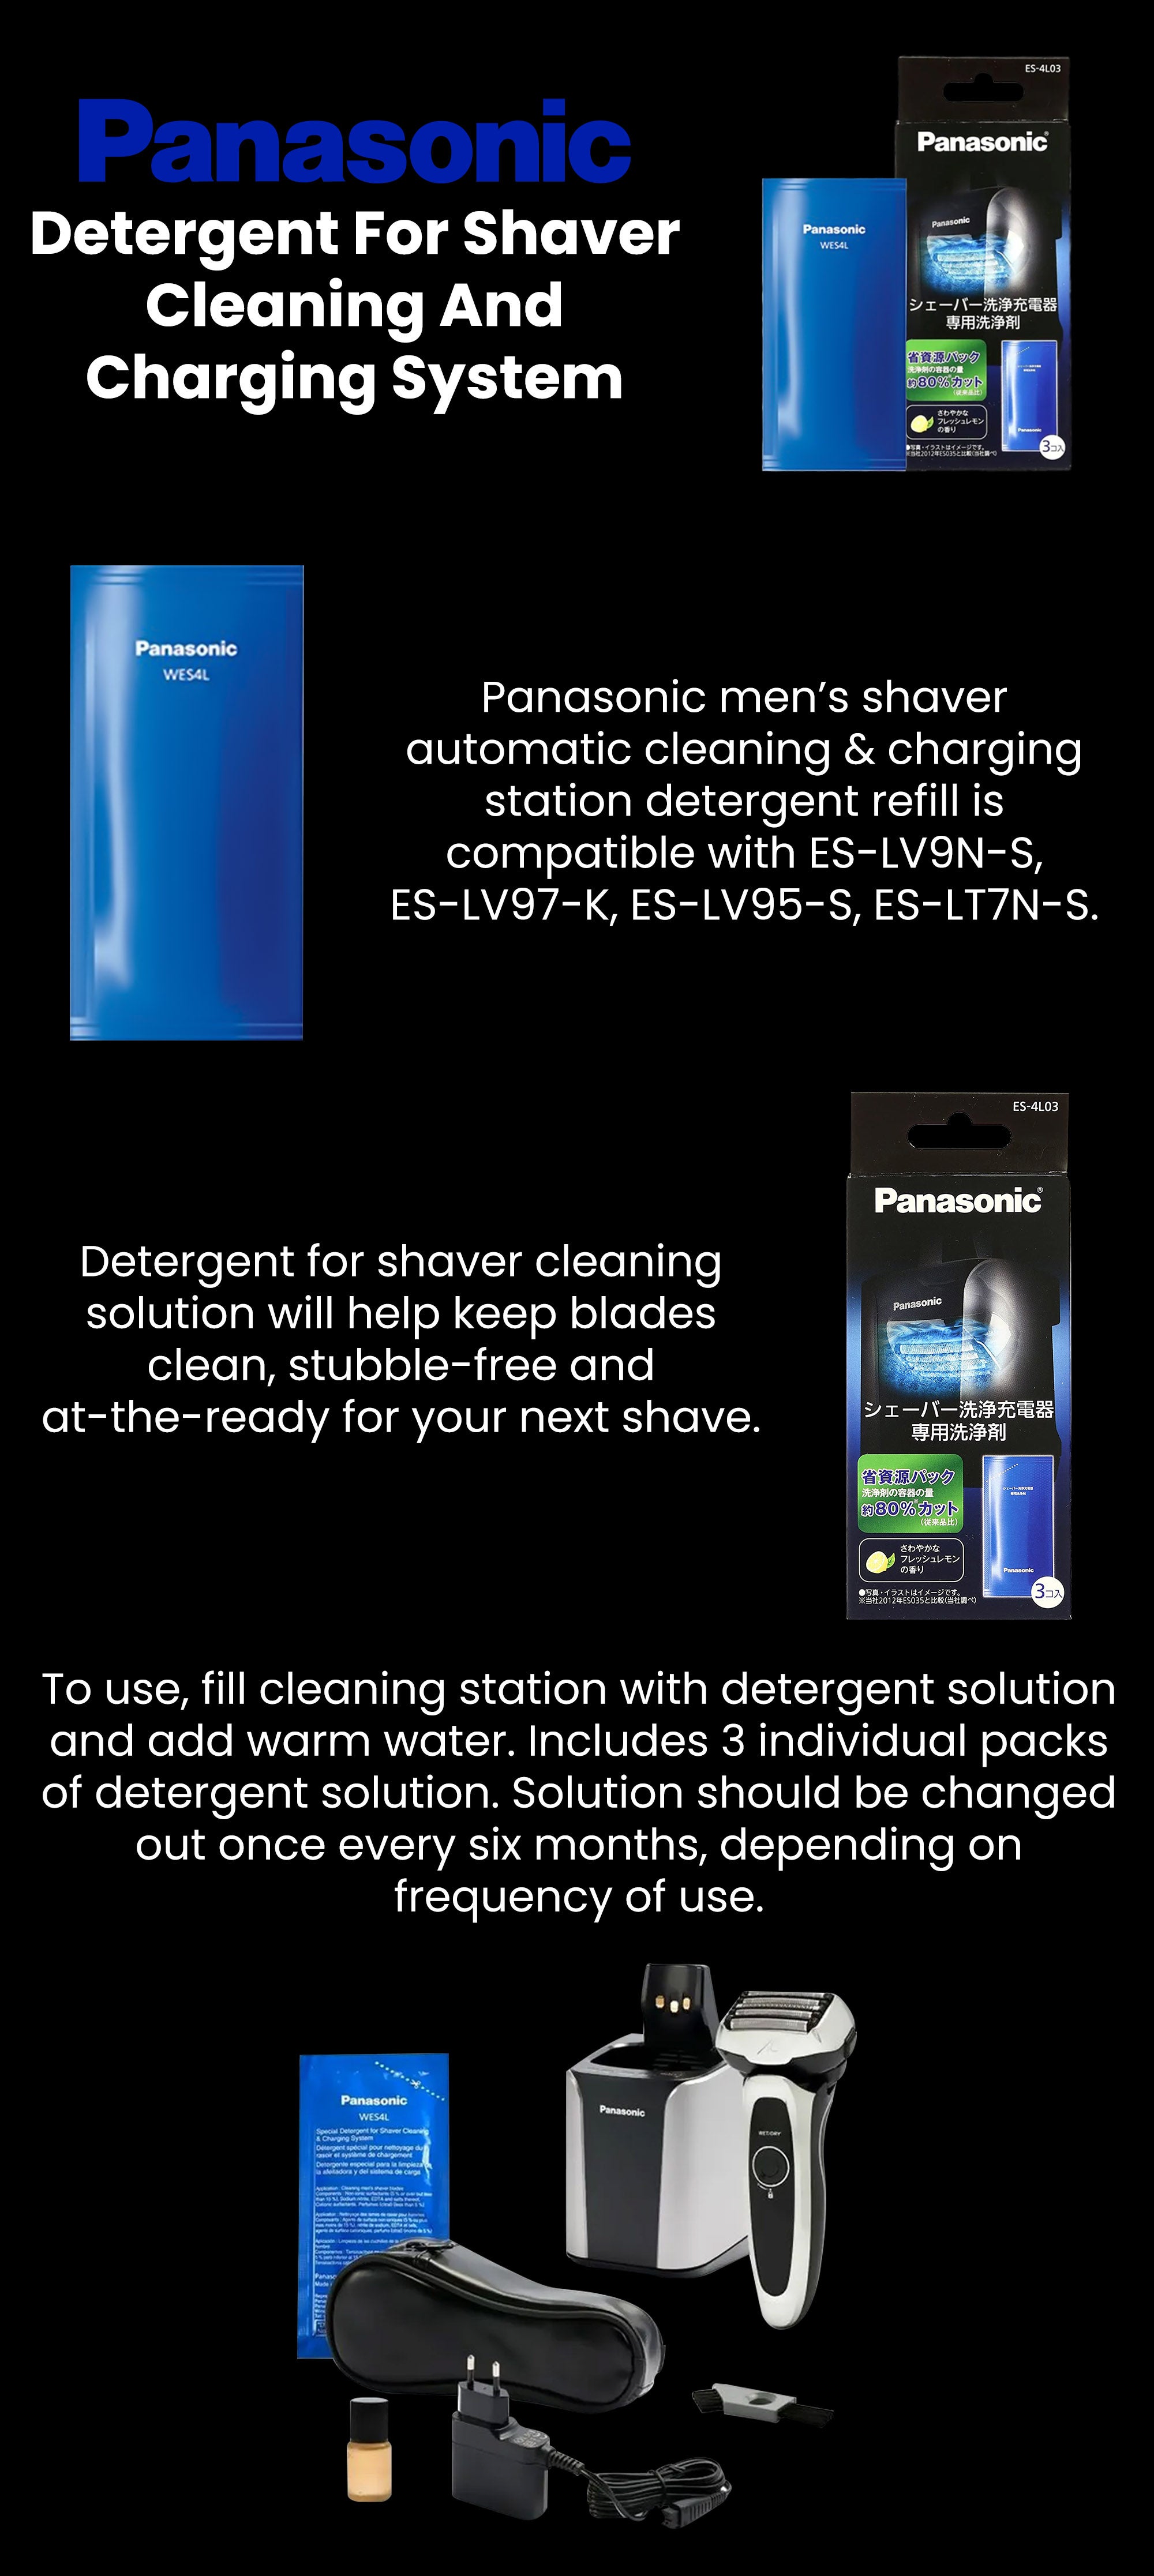 Detergent For Shaver Cleaning And Charging System Multicolour